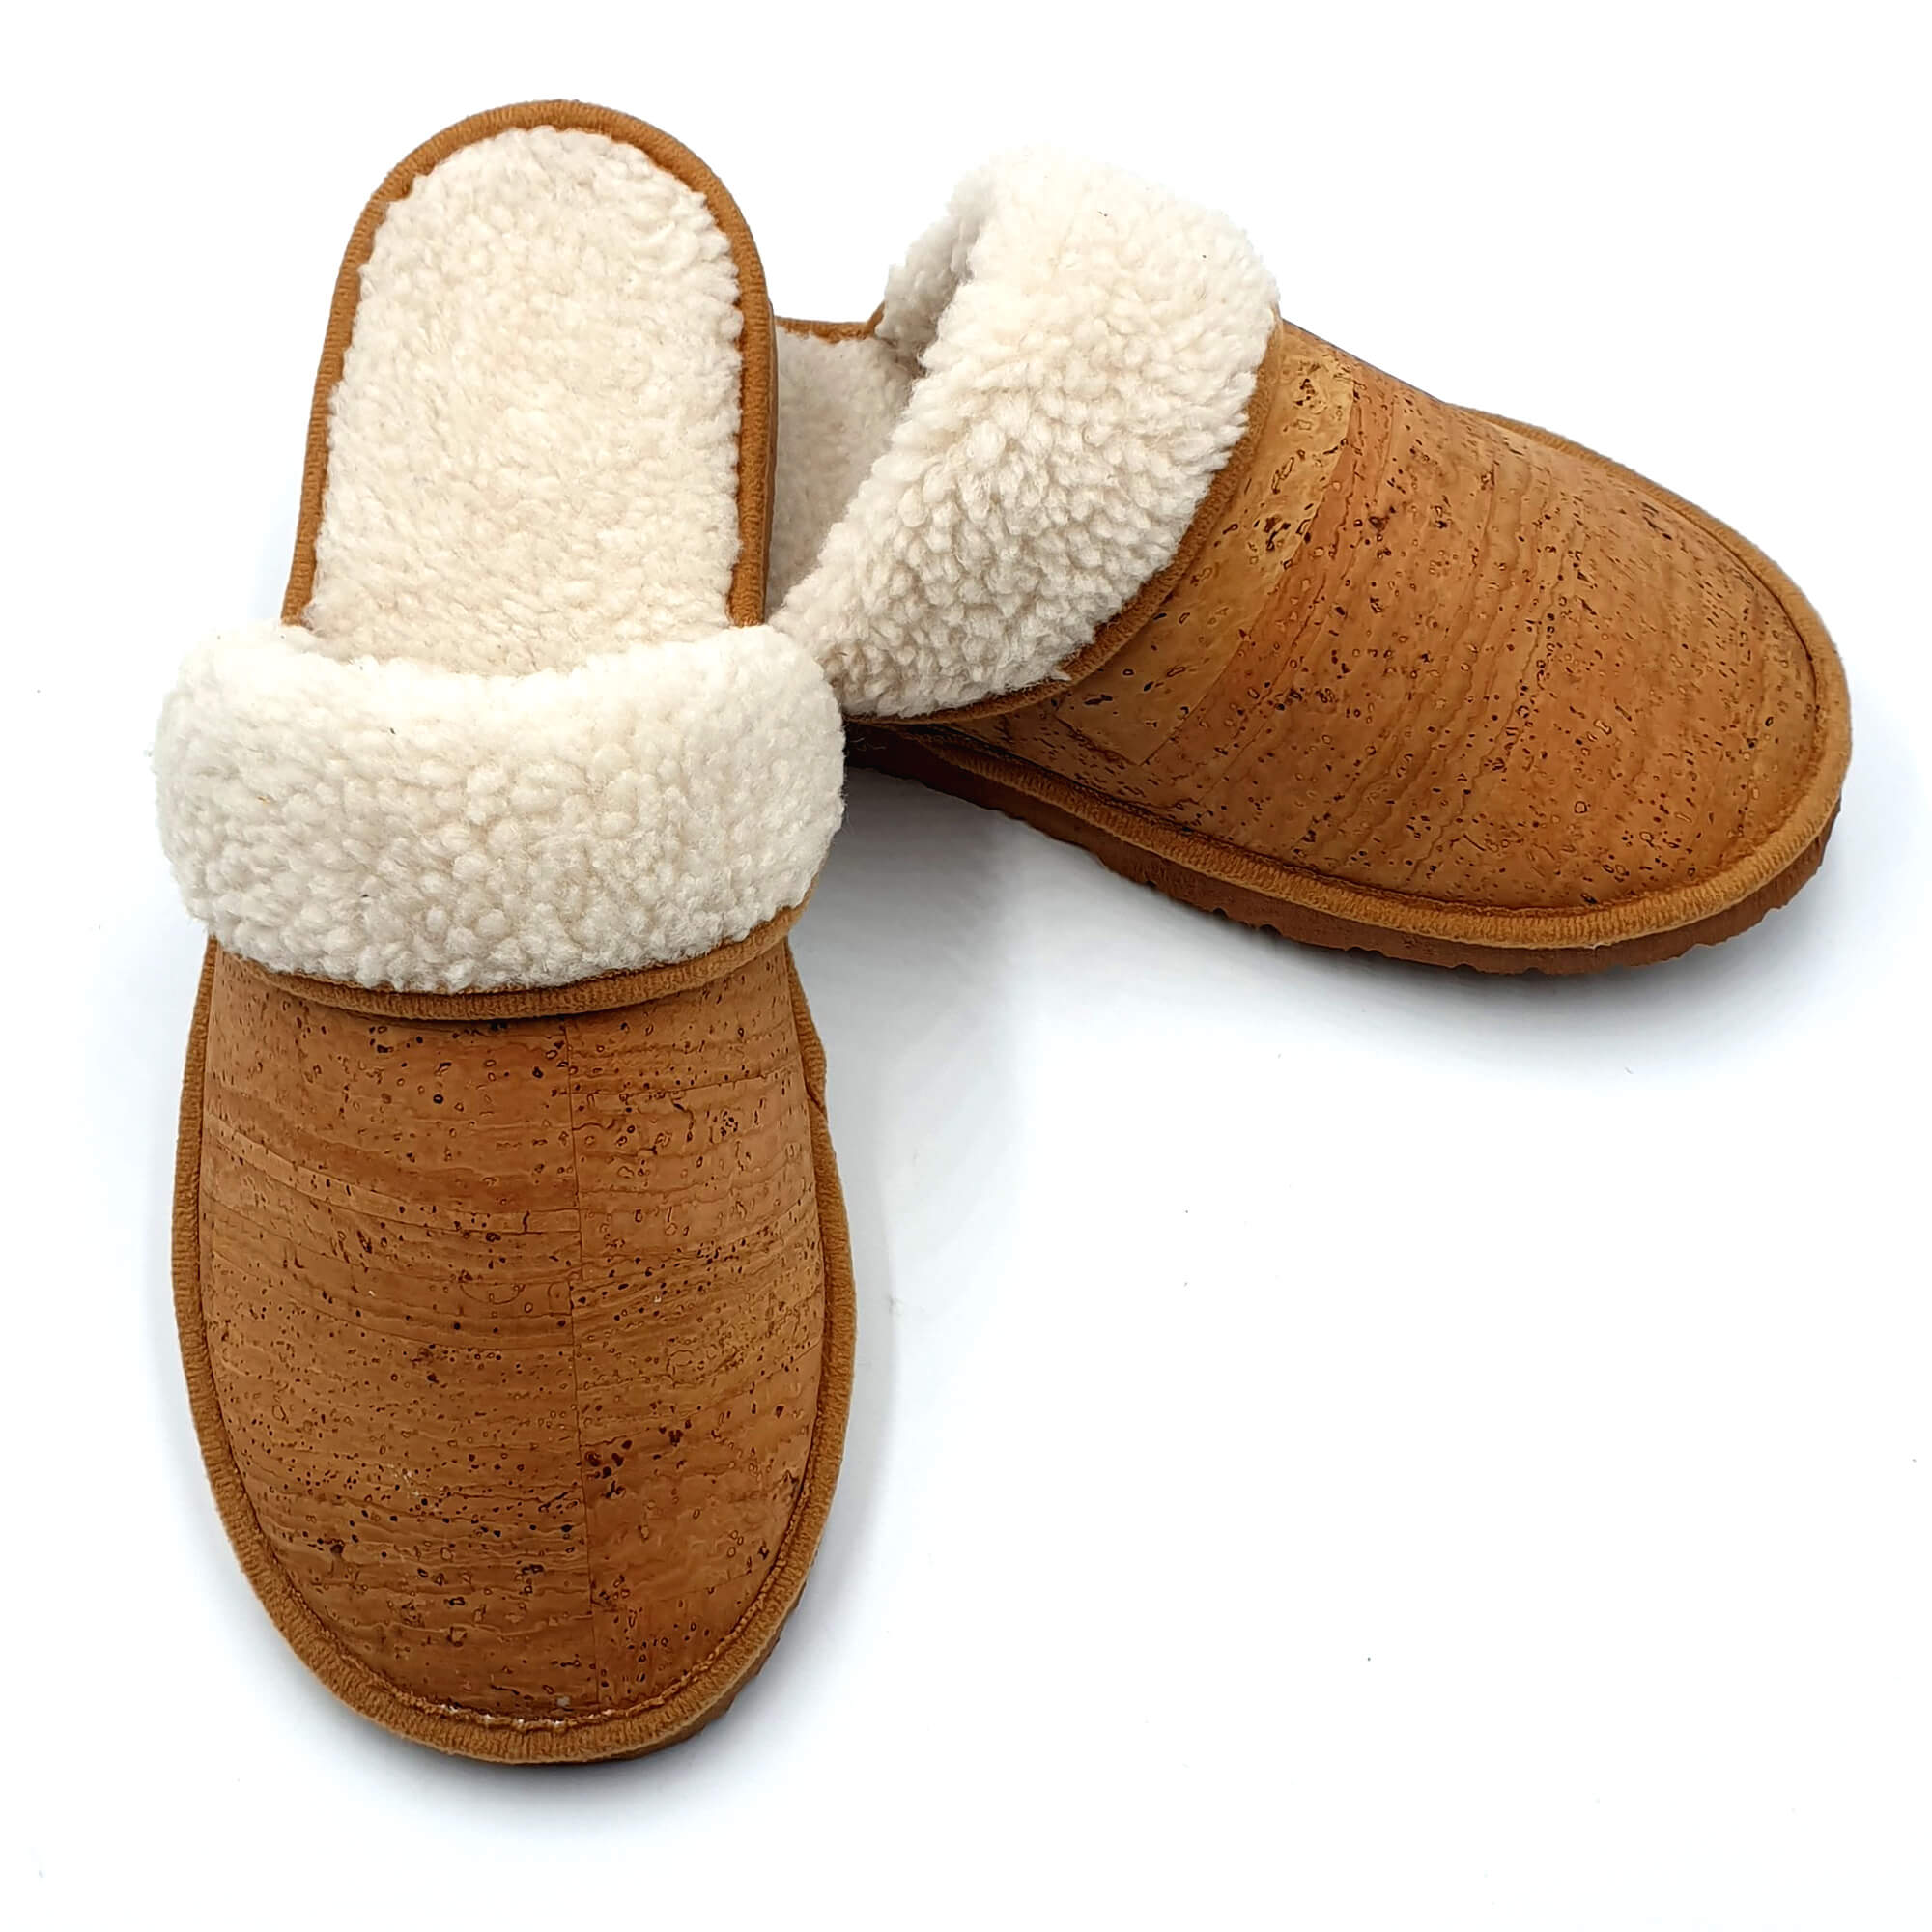 Natural Cork Slippers - Portuguese cork - Corkcho products